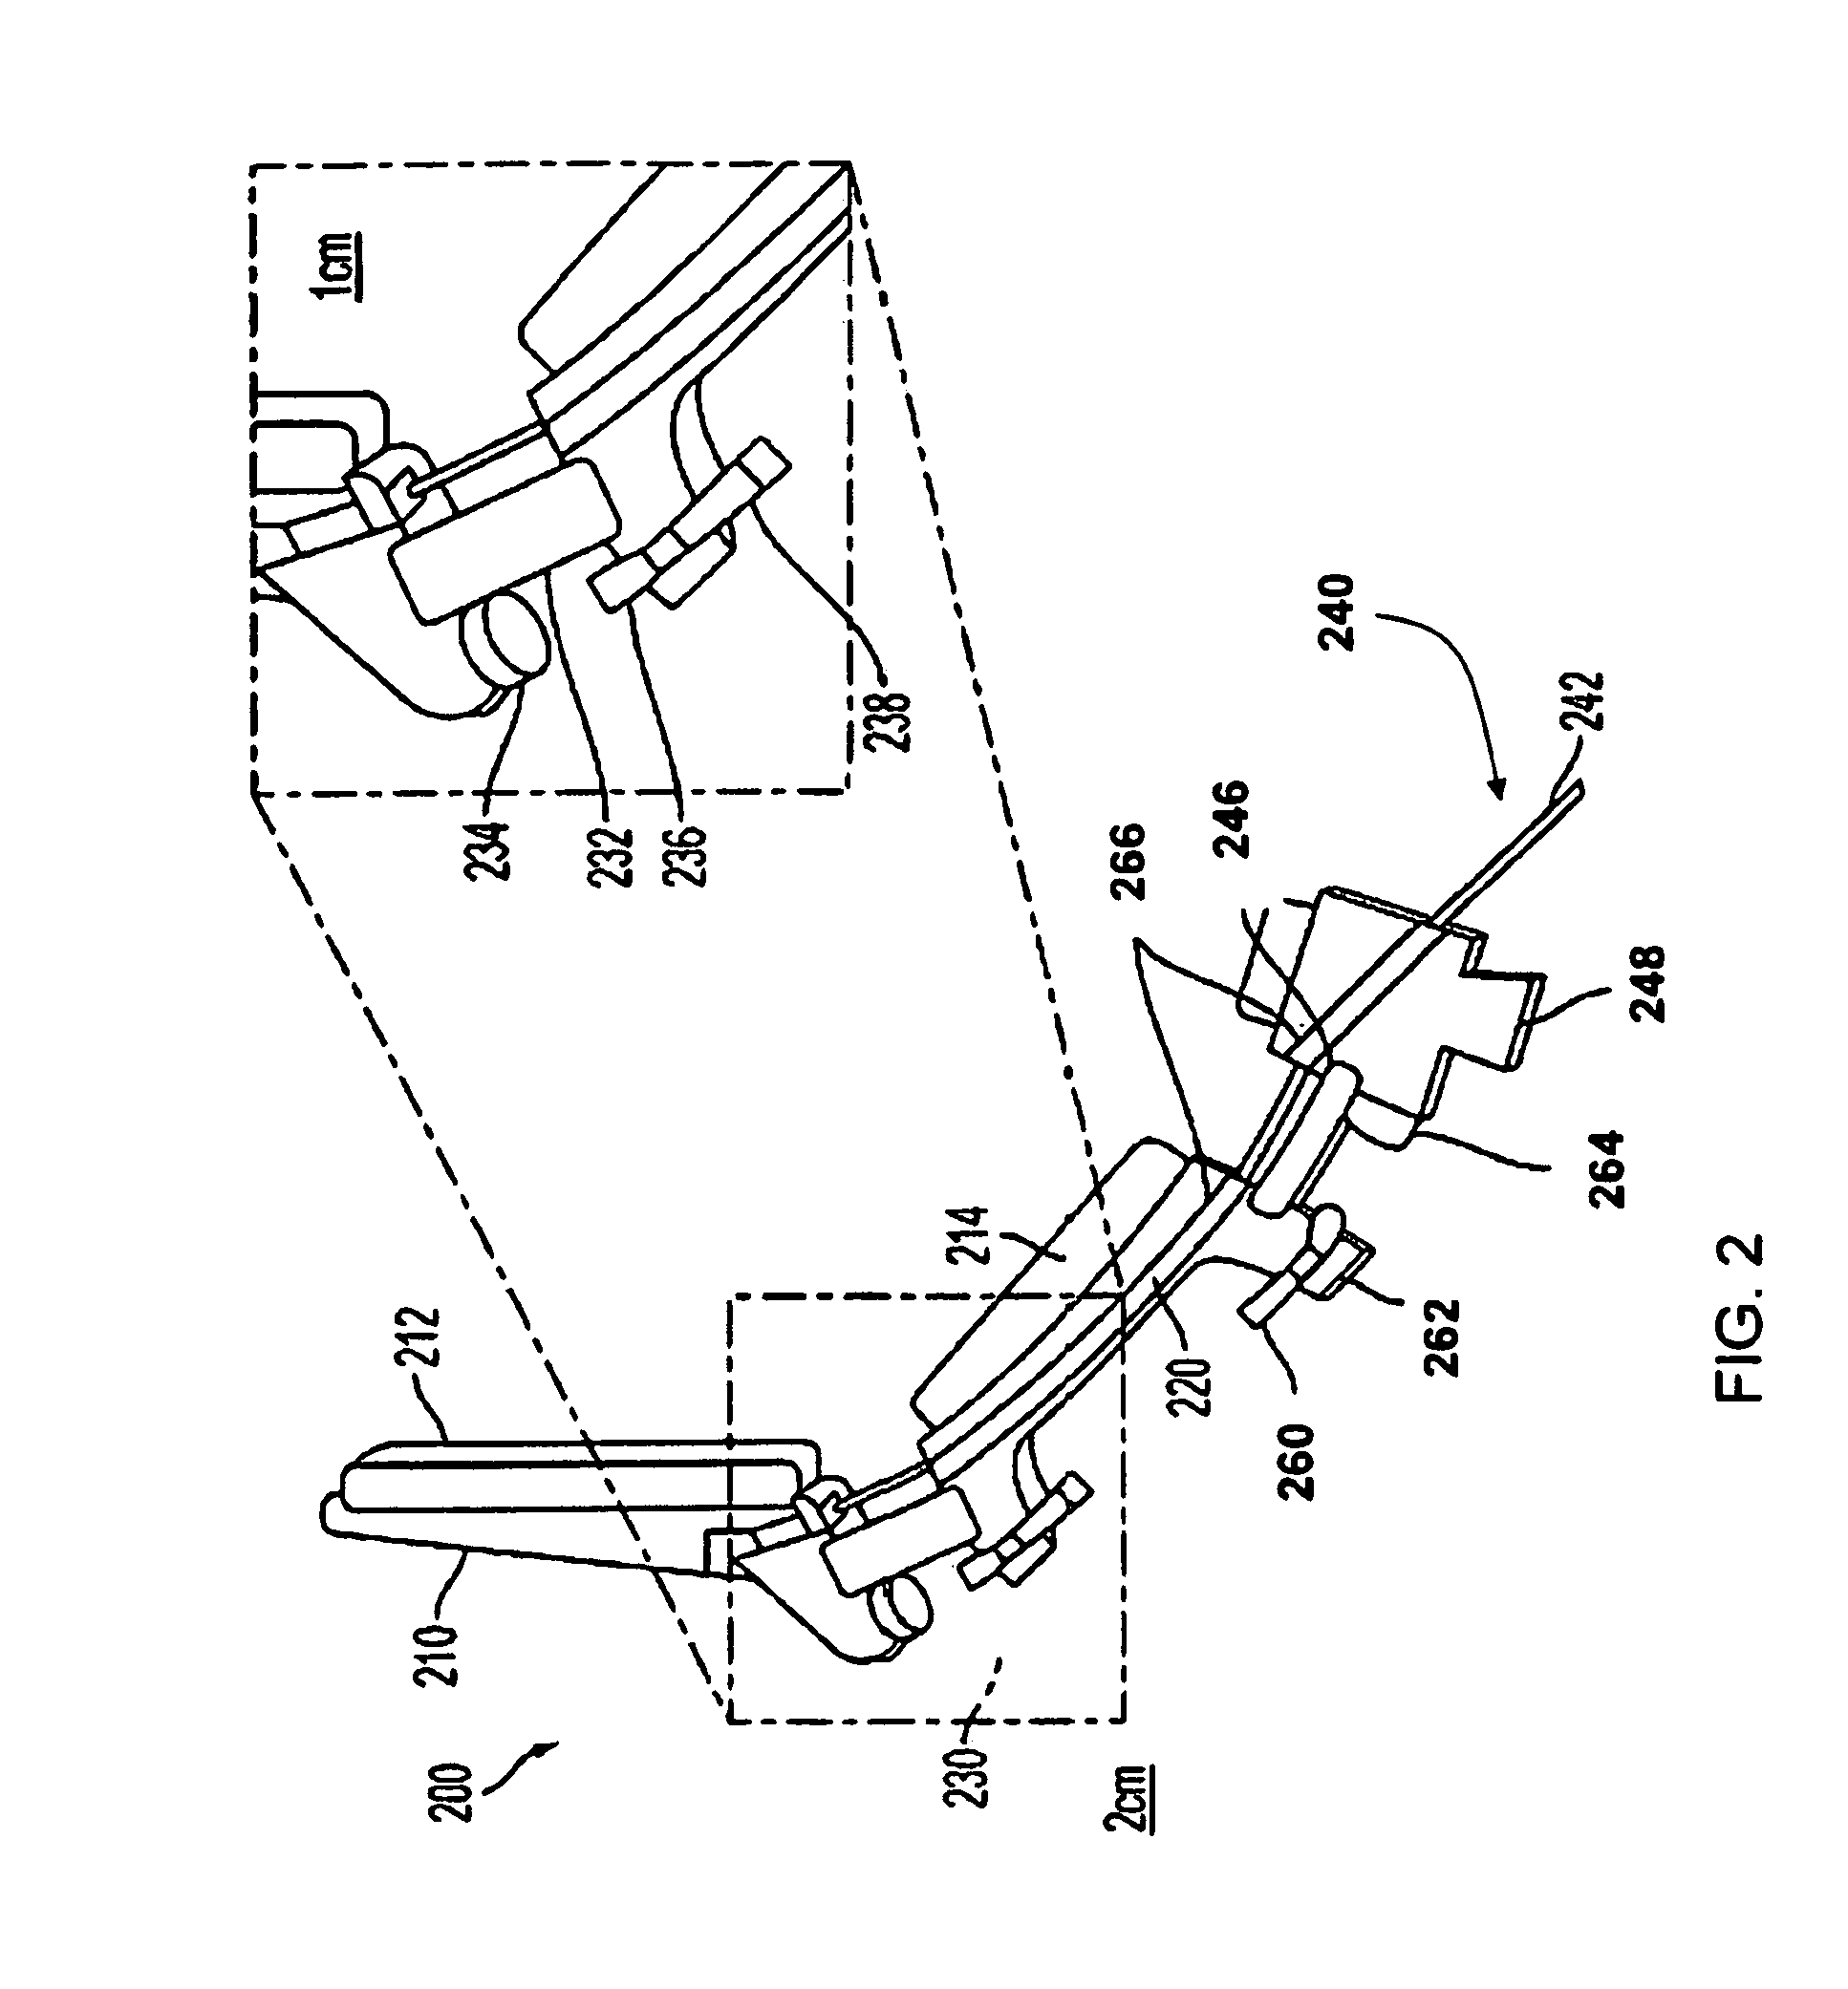 Robust compliant adaptive grasper and method of manufacturing same